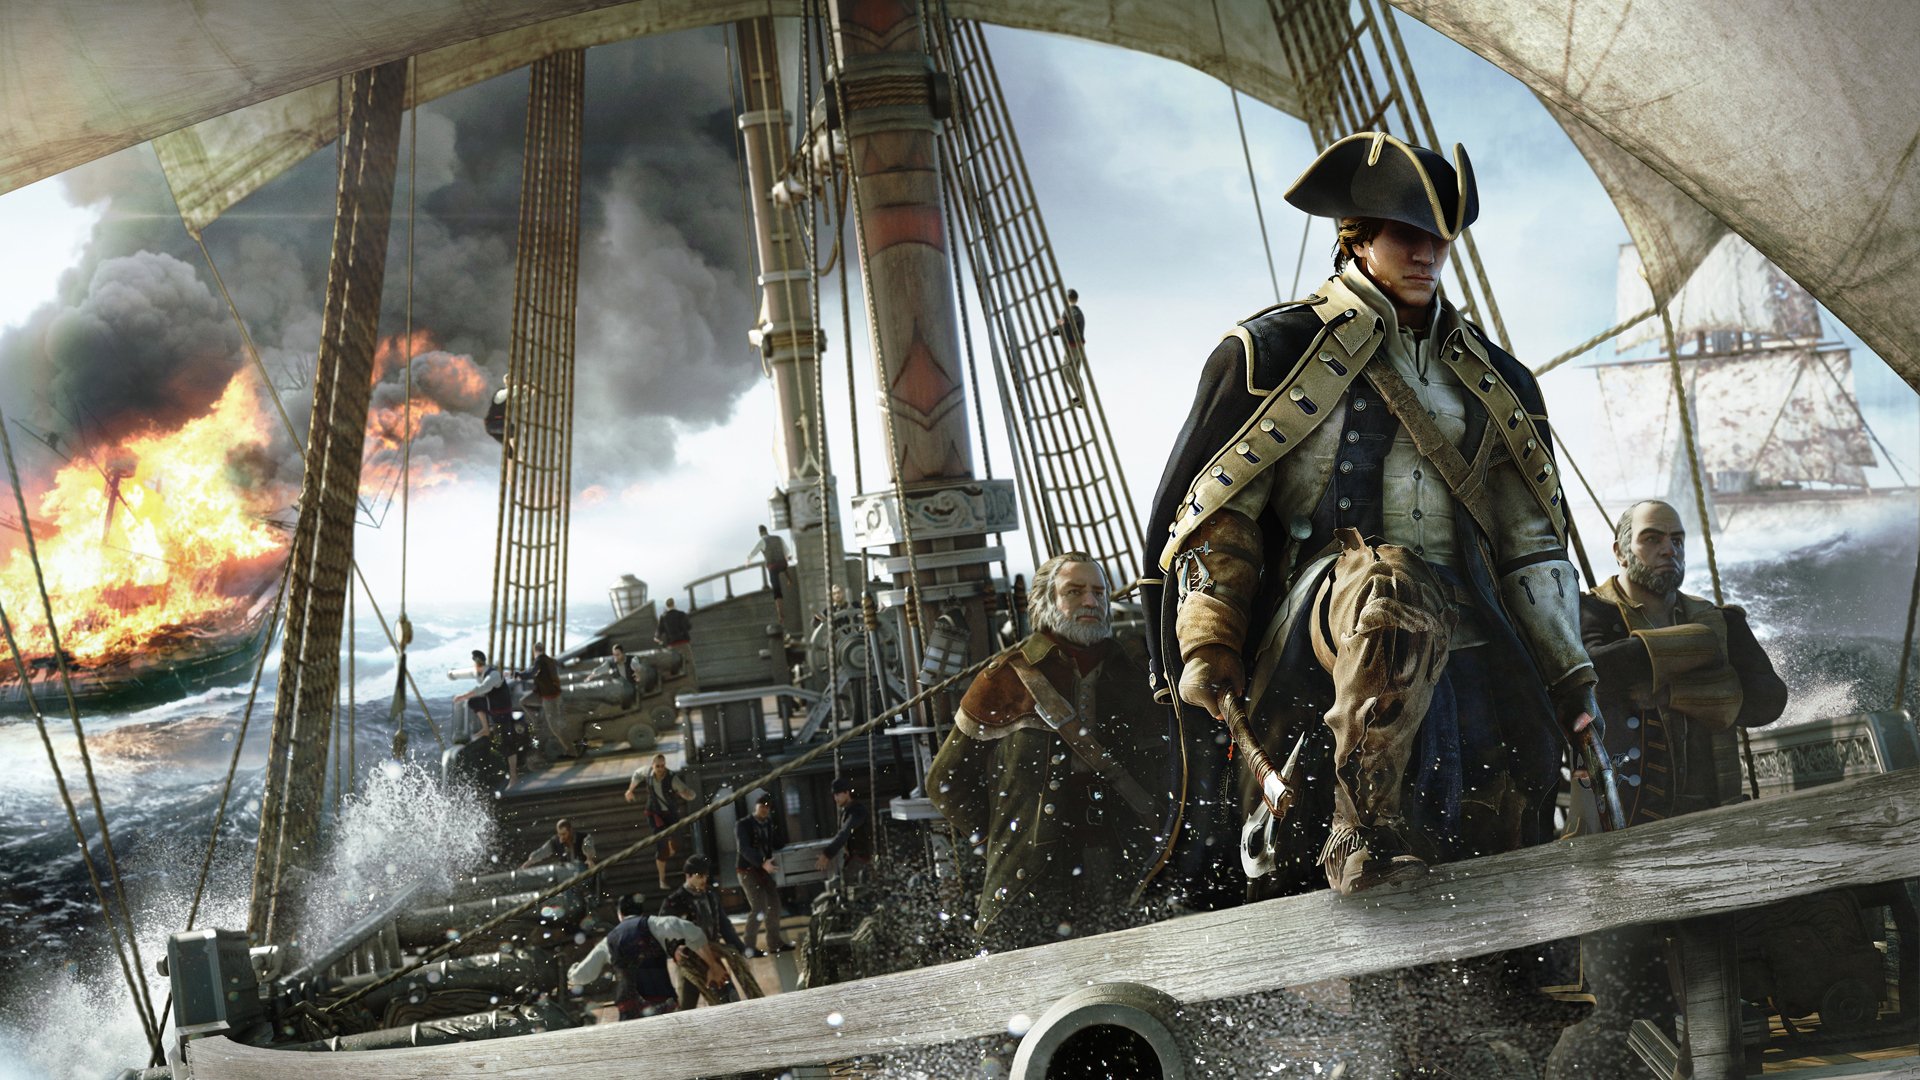 ac3 wallpaper,action adventure game,pc game,strategy video game,vehicle,ship